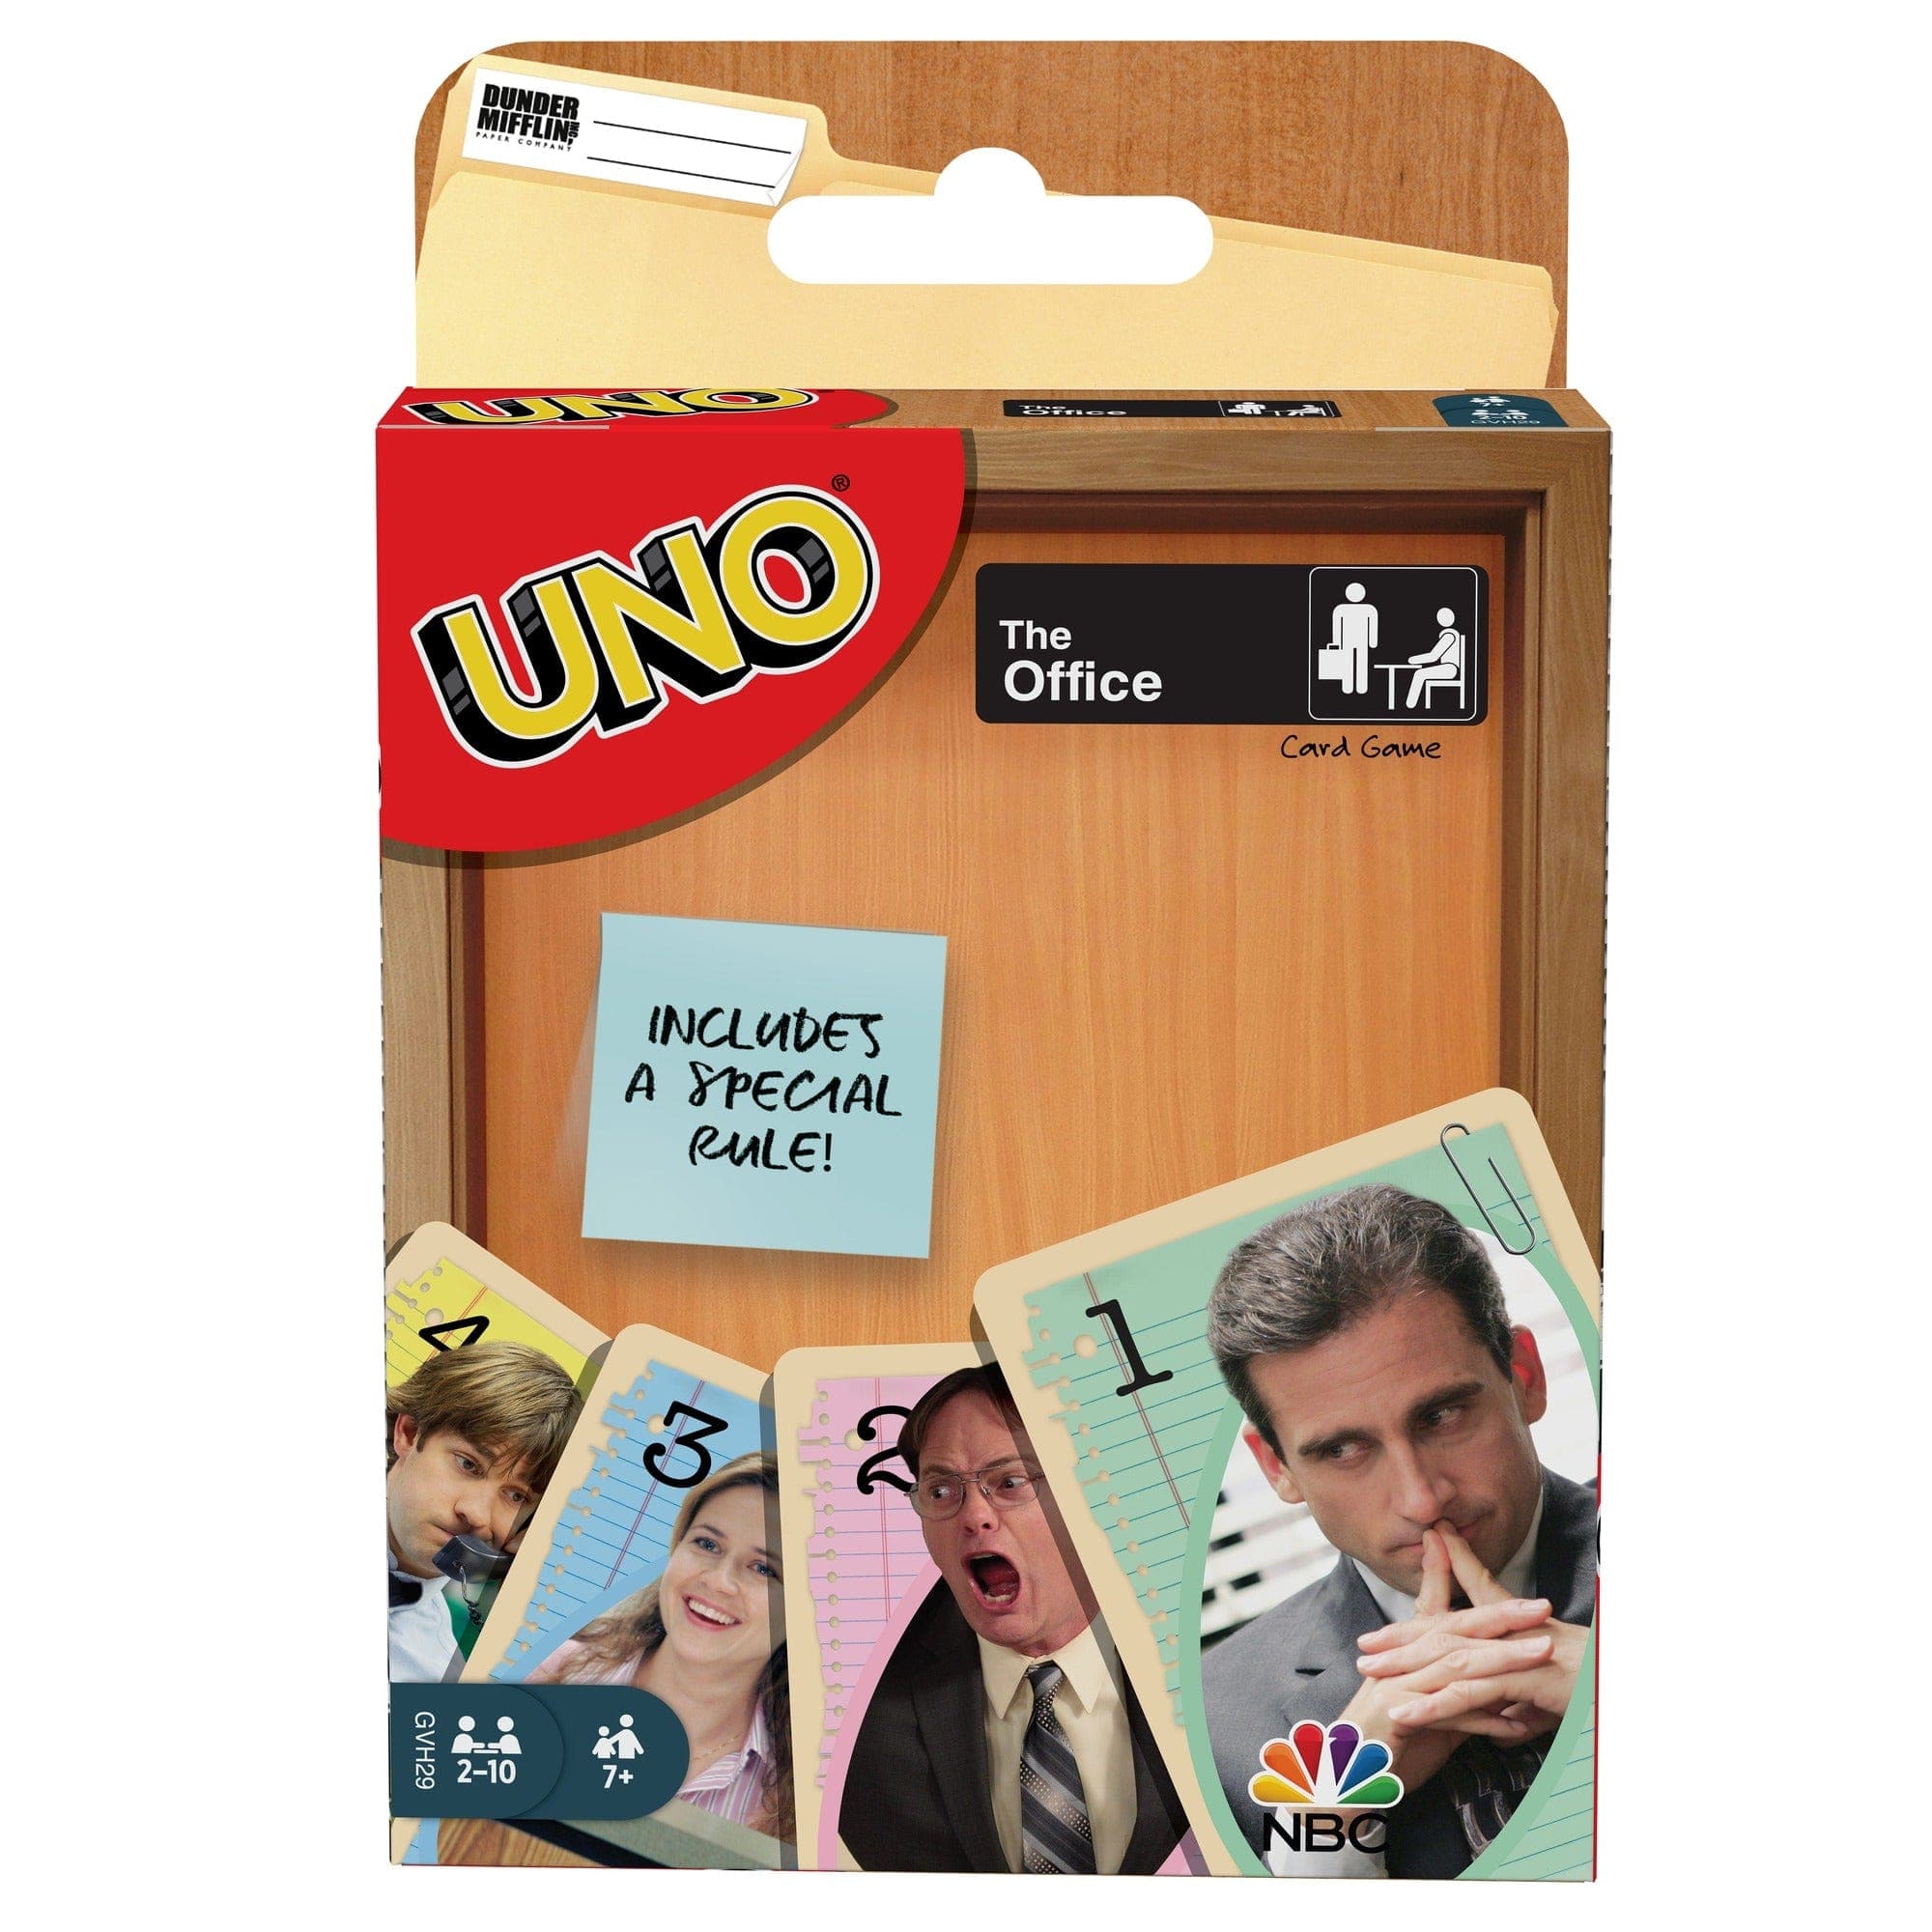 Uno Drunk Official Rules by harrypotterstore